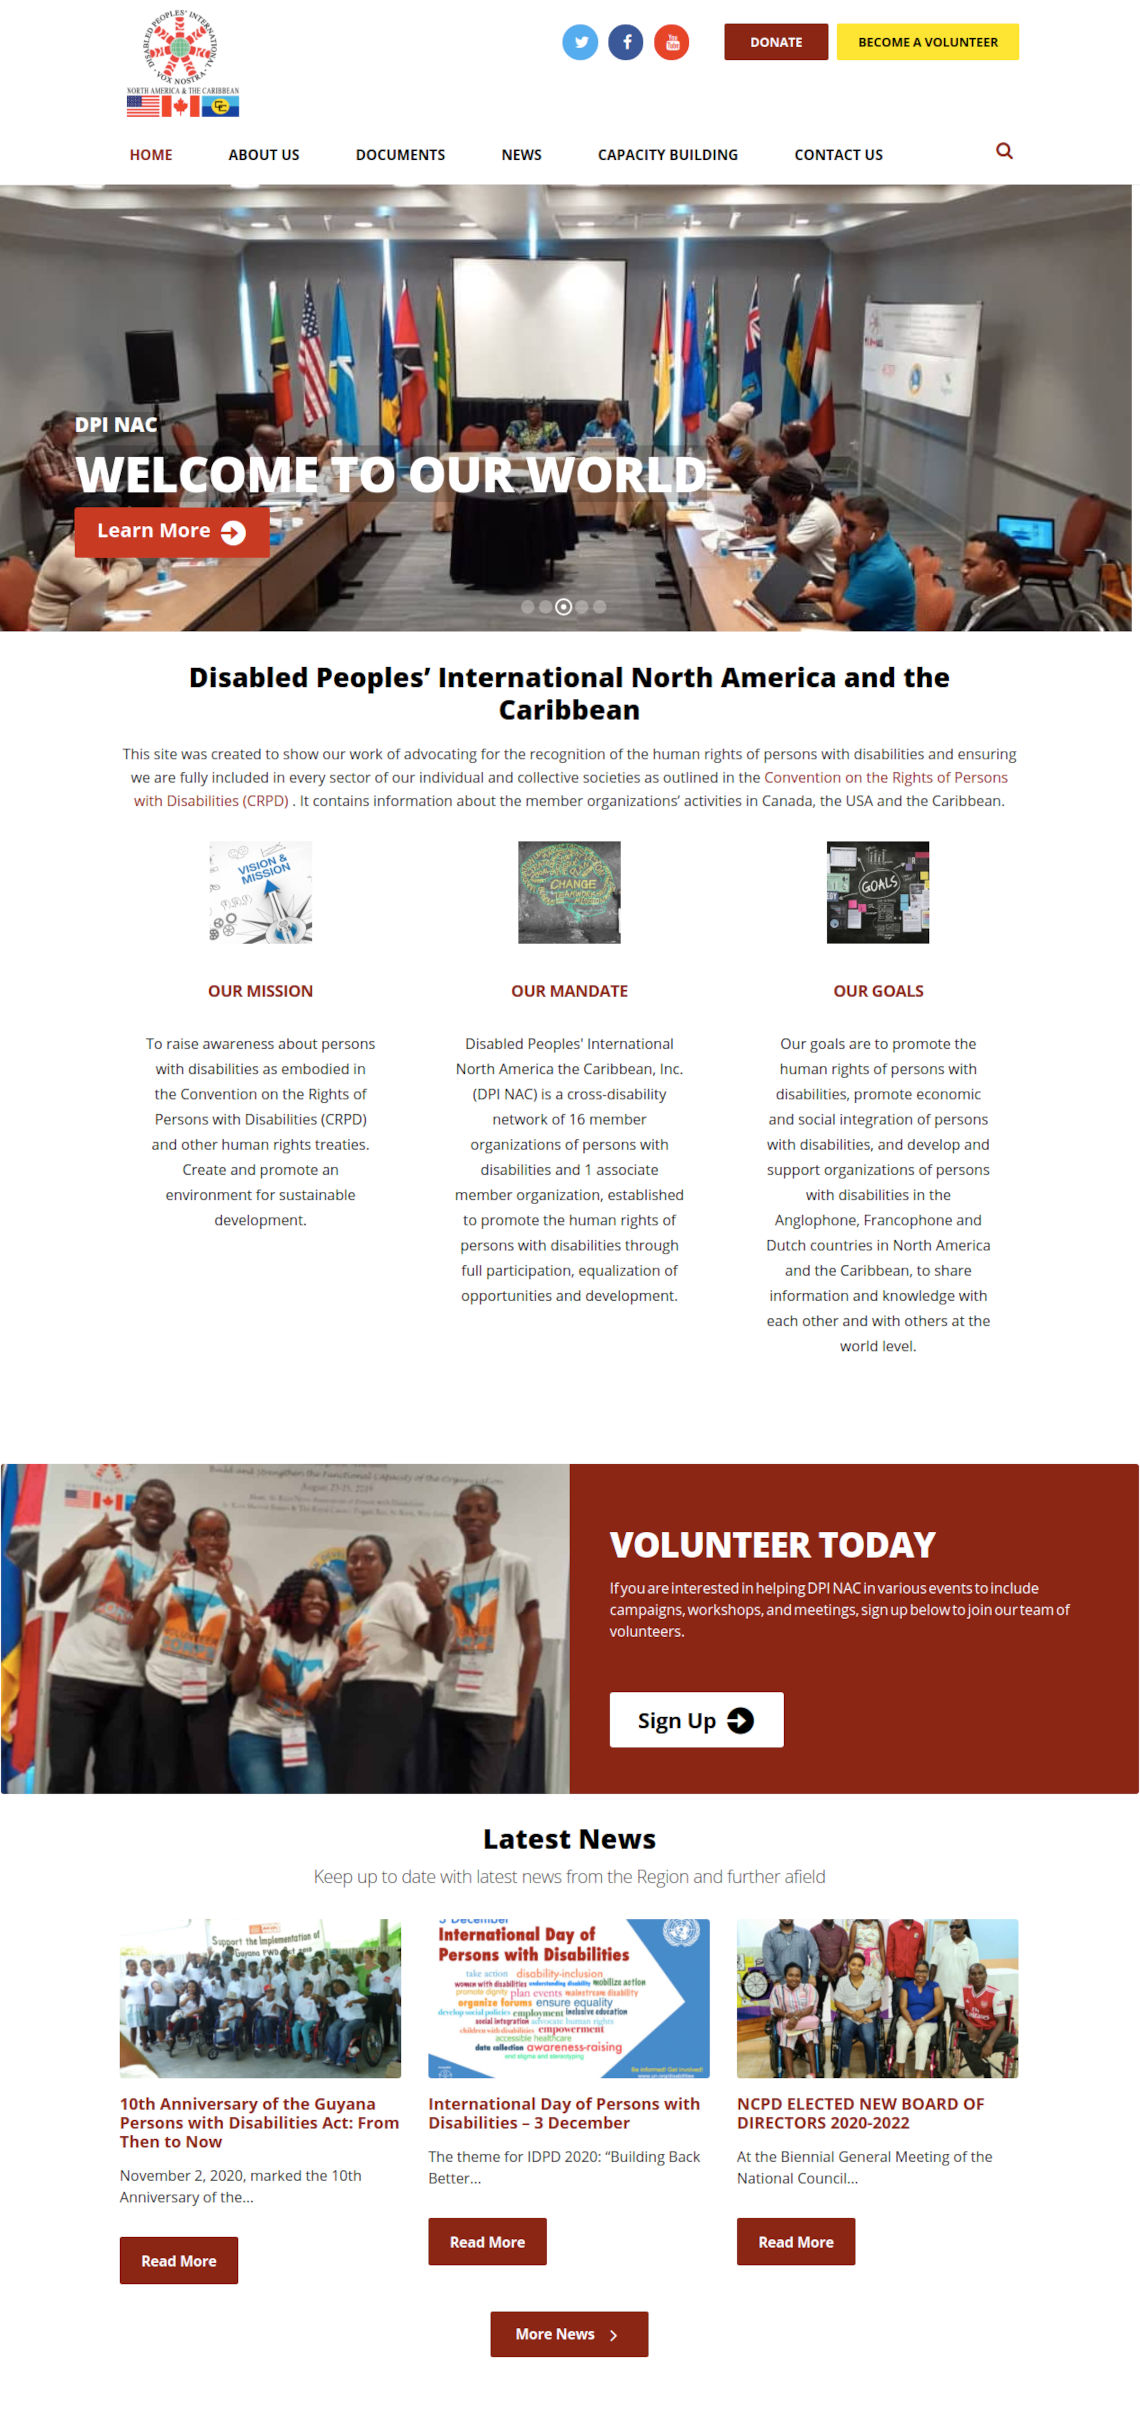 Disabled People's International North America and the Caribbean website by Anchor Monkey